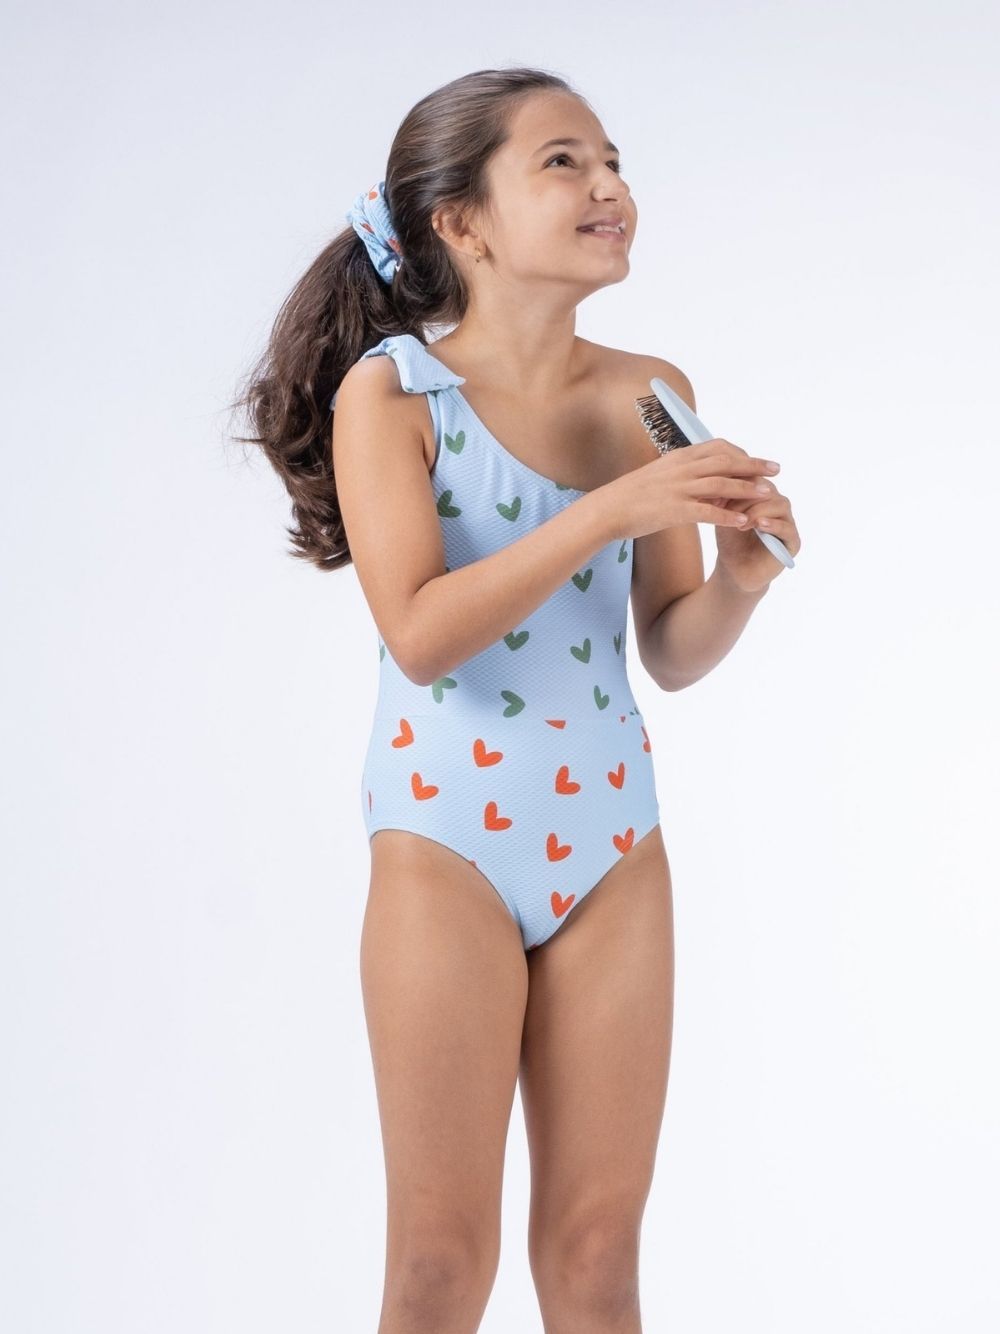 Assymetric textured hearts swimsuit